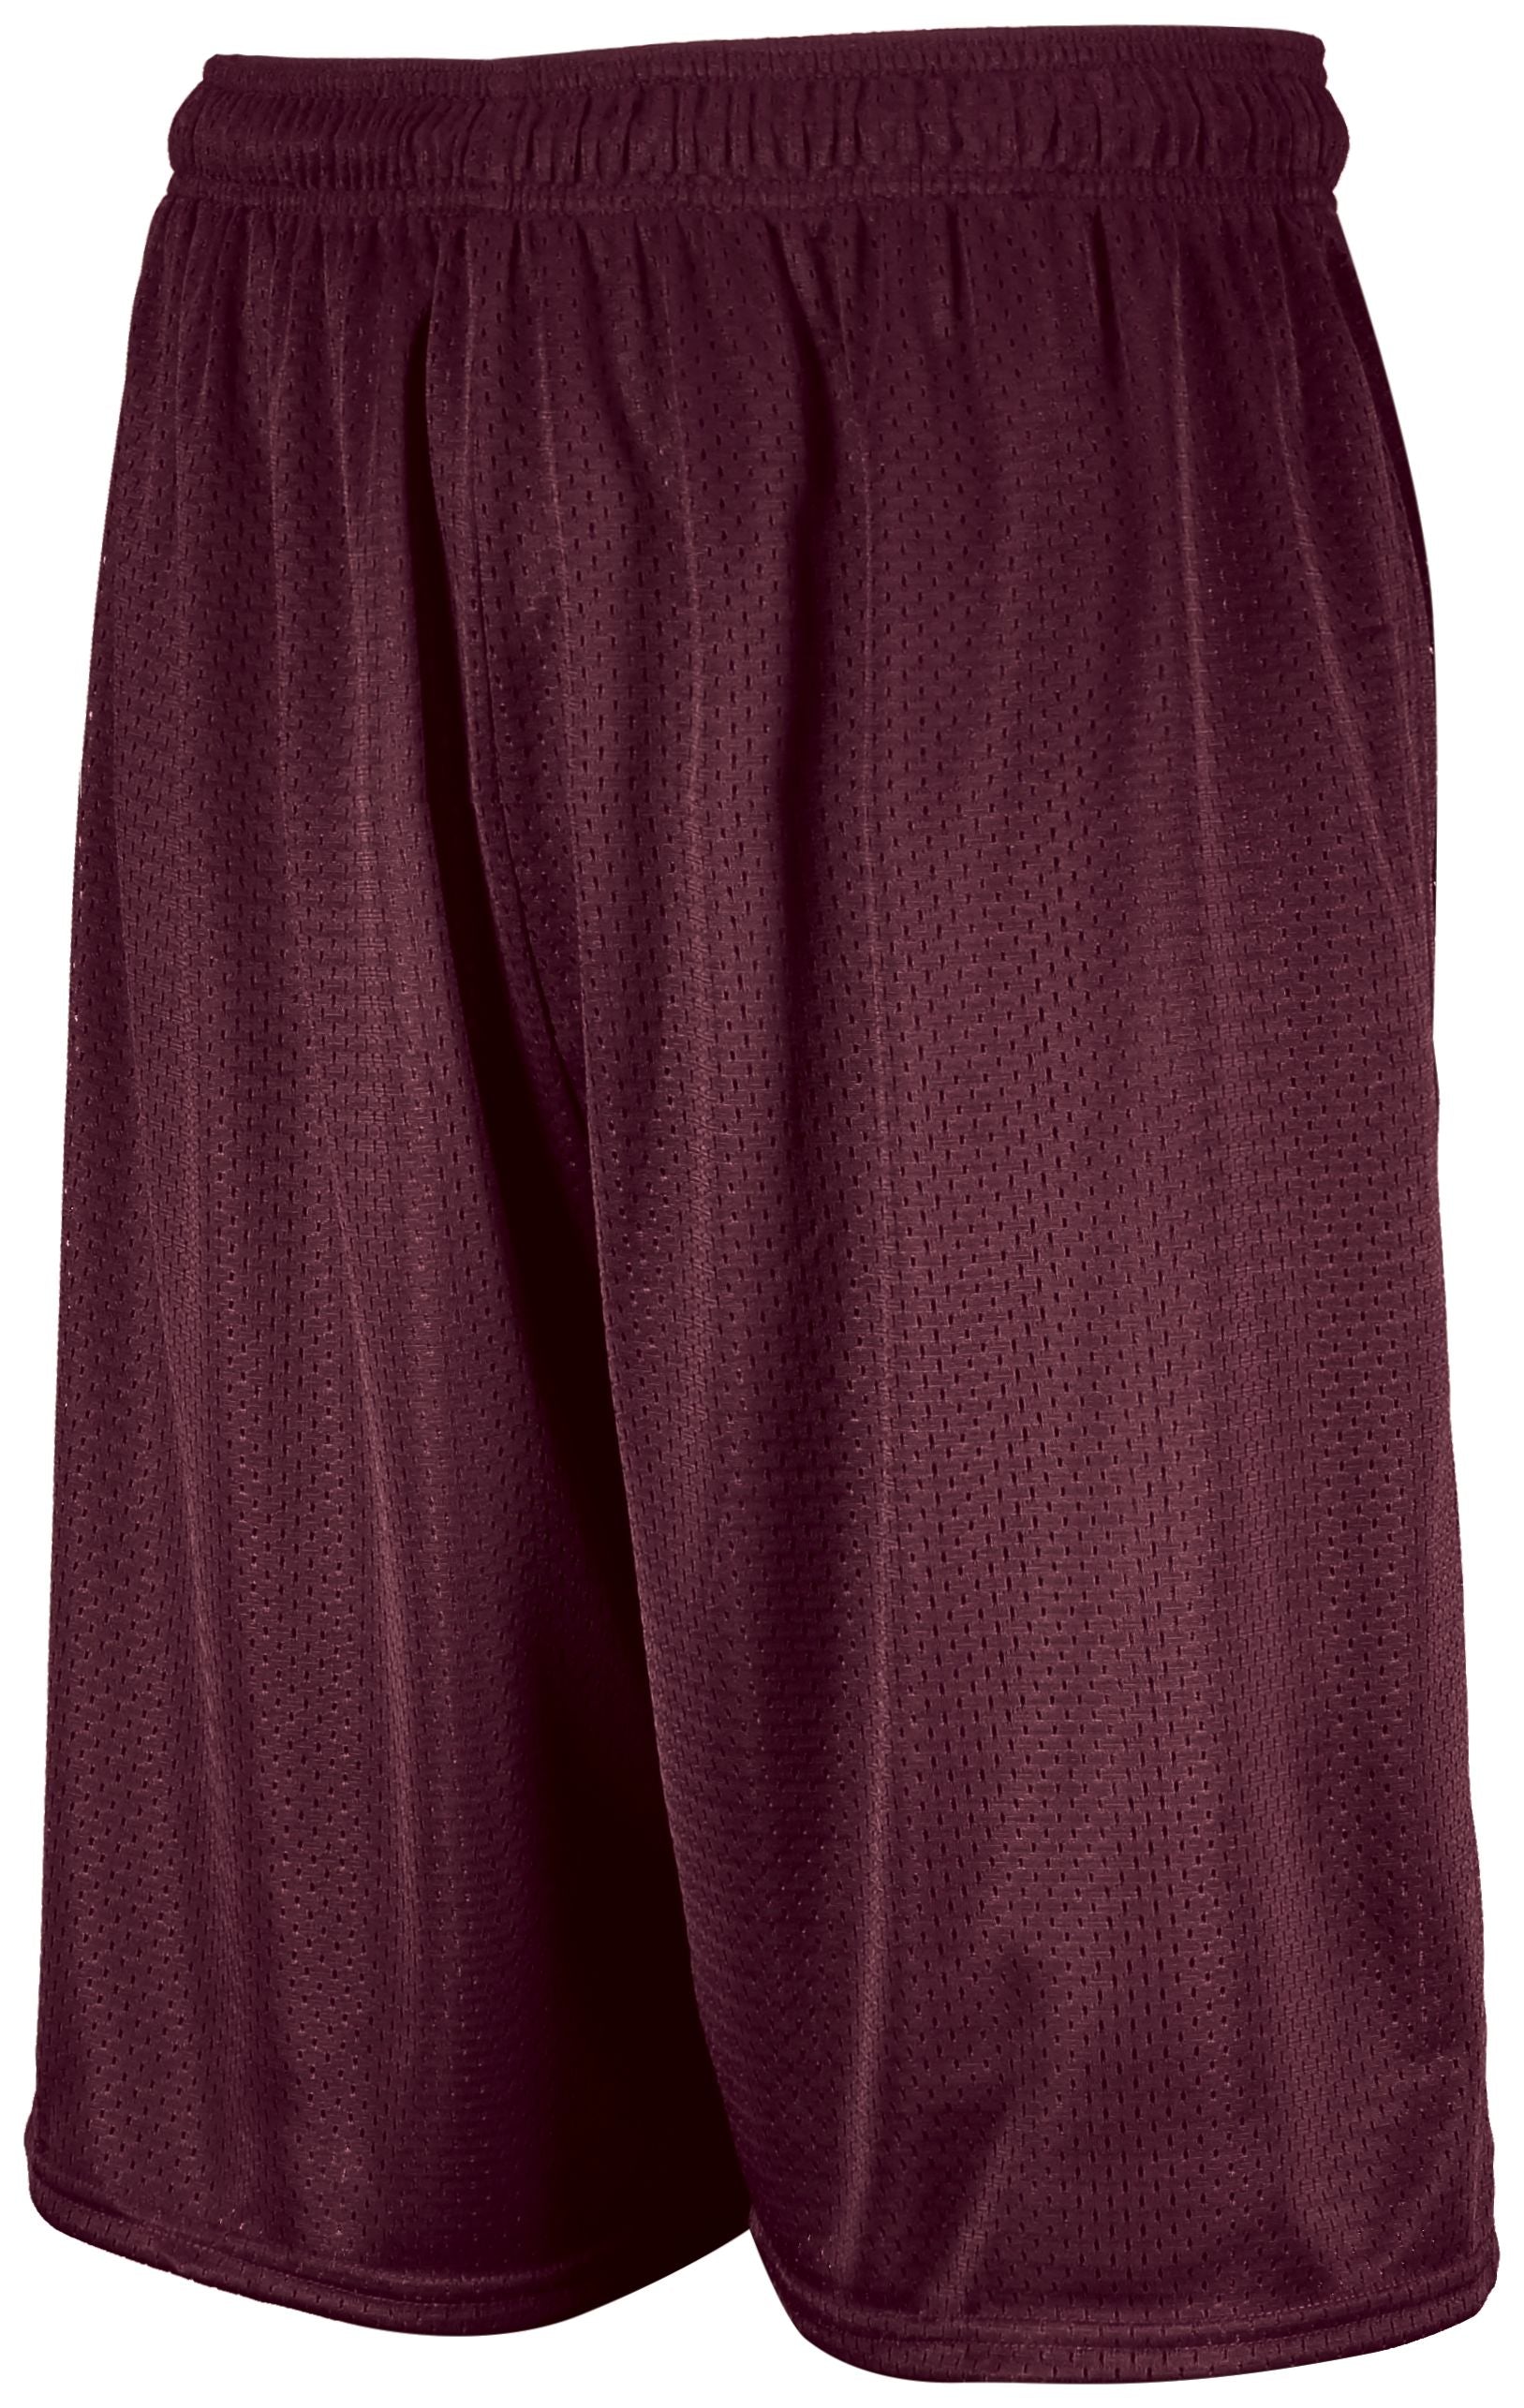 Russell Athletic Dri-Power Mesh Shorts in Maroon  -Part of the Adult, Adult-Shorts, Russell-Athletic-Products product lines at KanaleyCreations.com